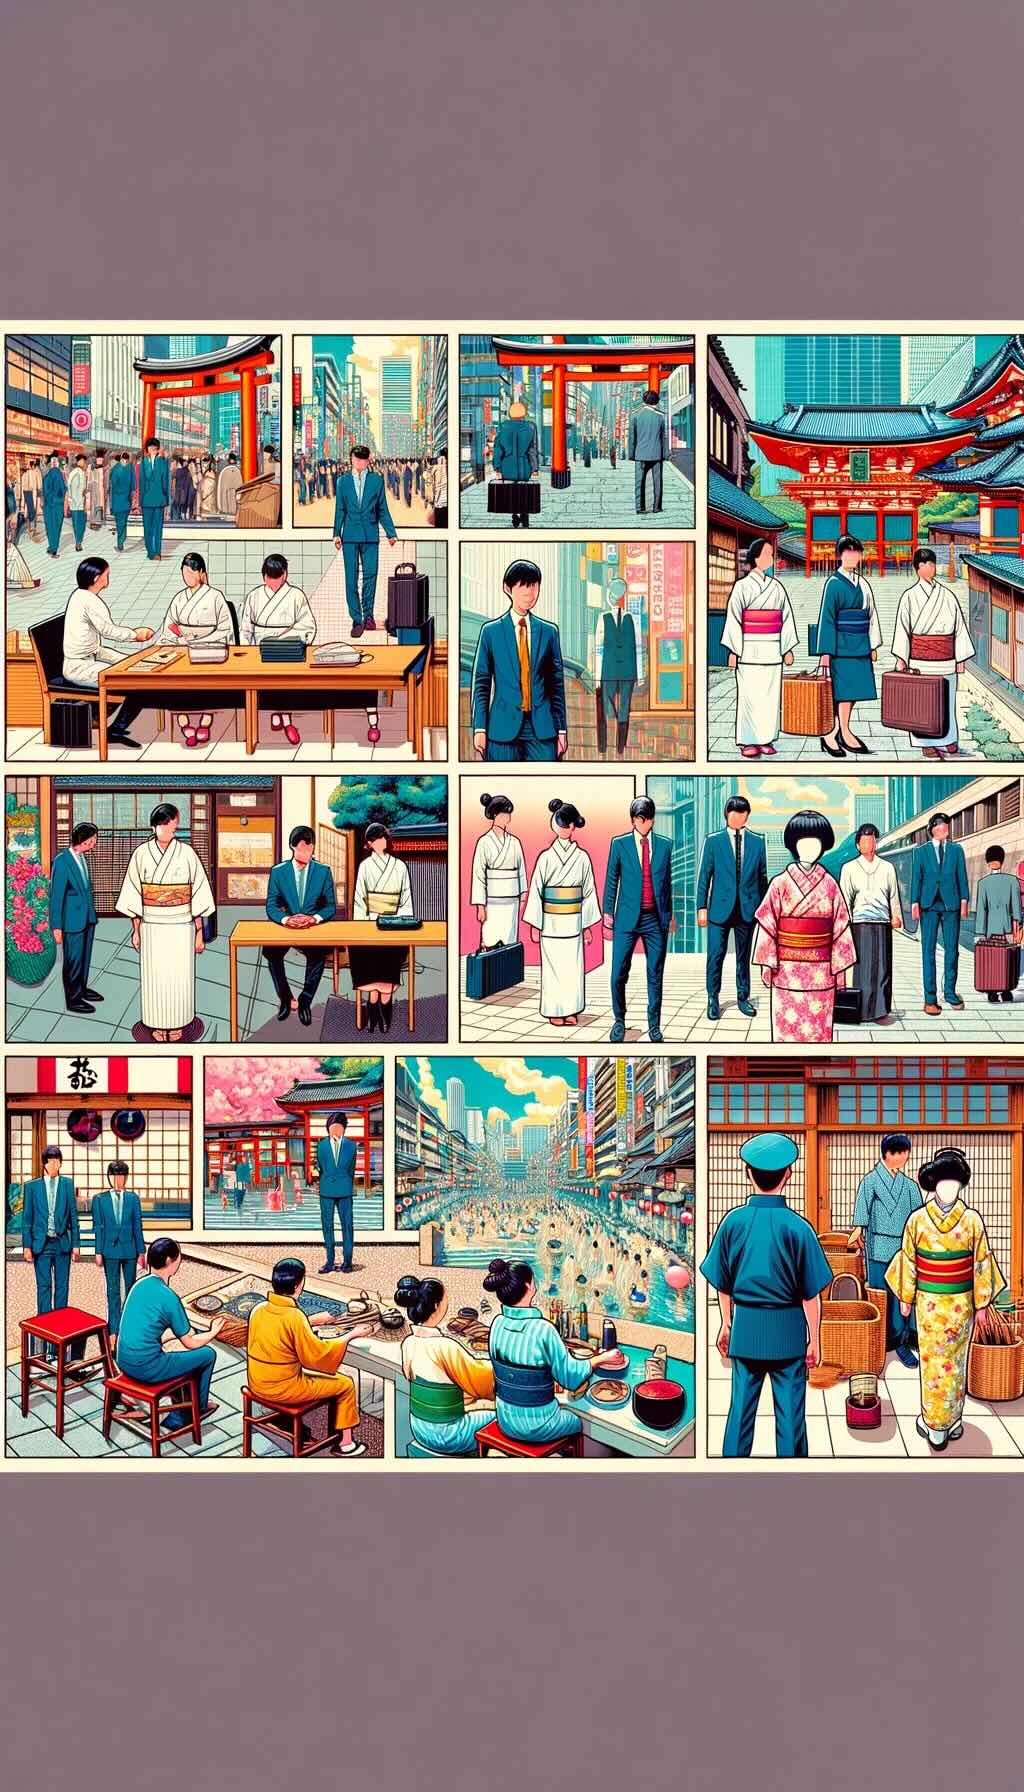 Various dress codes and the importance of neatness and grooming in Japan depicts different settings and the appropriate attire for each: formal business attire in a corporate environment, smart casual for streets, shrines, and temples, and traditional wear like yukatas in onsens or festivals. It highlights the significance of dressing modestly in sacred places. The image shows the value placed on personal grooming and neatness as a form of respect in Japanese culture. Scenes of well-groomed individuals in various scenarios are included, such as service staff, corporate professionals, and the general public, all maintaining an immaculate appearance. This artwork conveys the diversity and importance of dress code and grooming in Japan, capturing the cultural nuances.